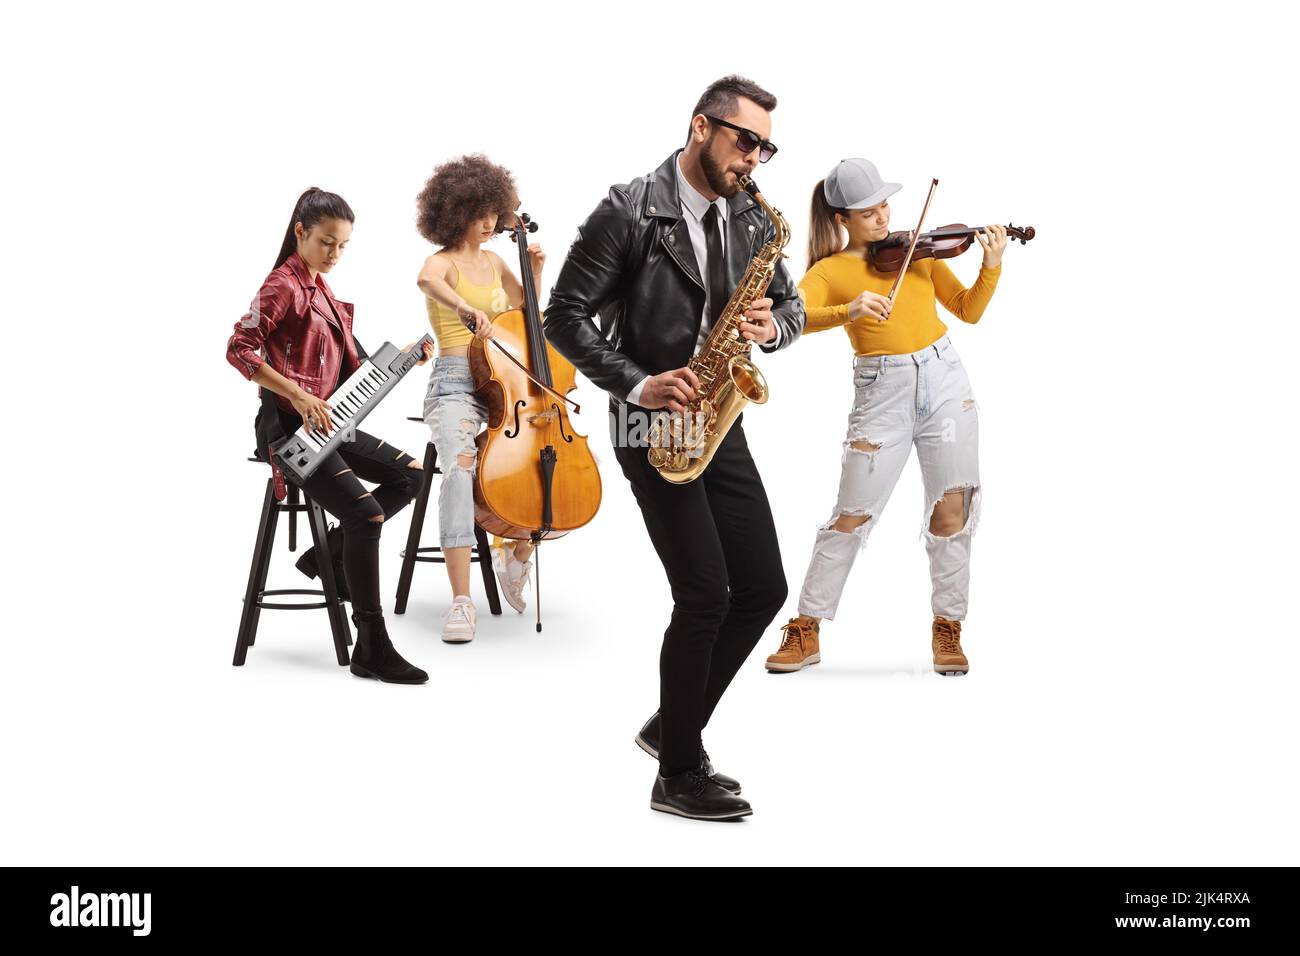 Music band consisting of female musicians on cello, violin and keytar and a man with a saxophone isolated on white background Stock Photo